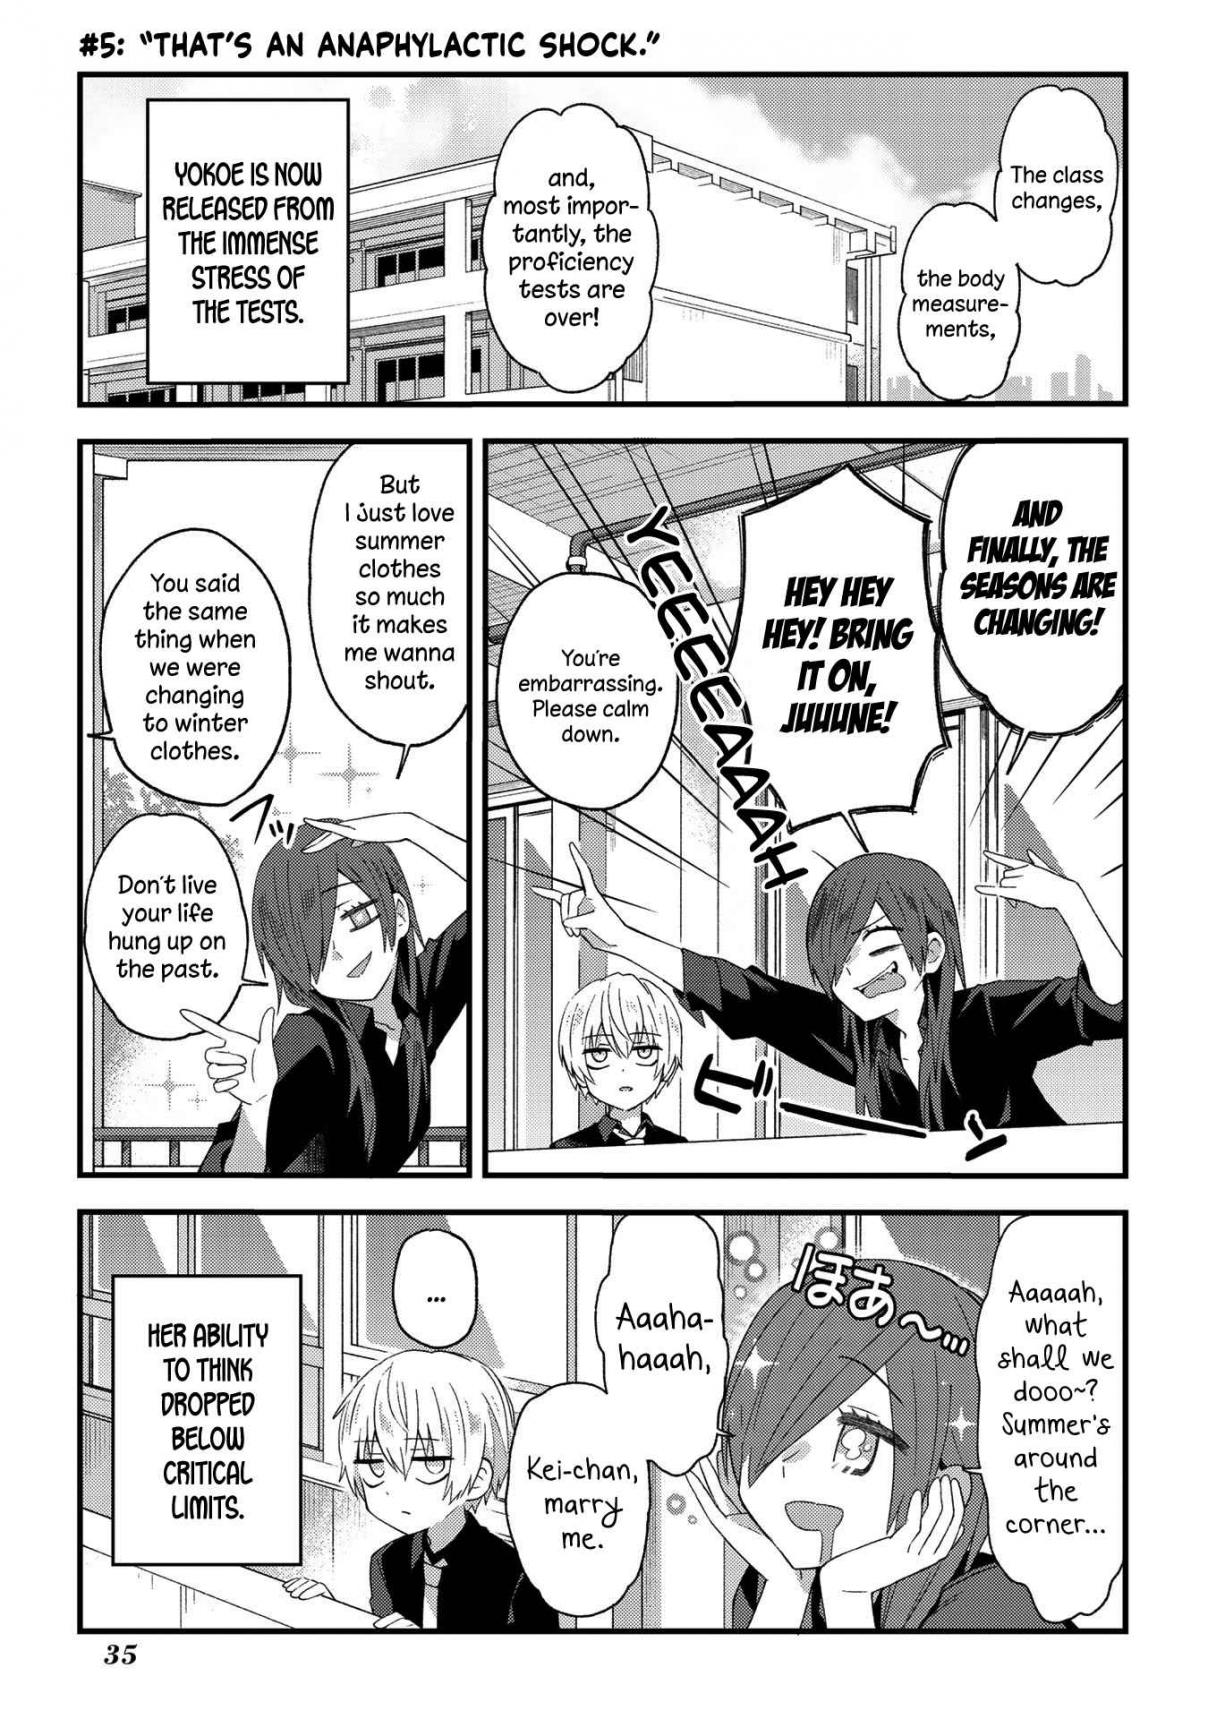 School Zone Vol. 1 Ch. 5 That's an anaphylactic shock.